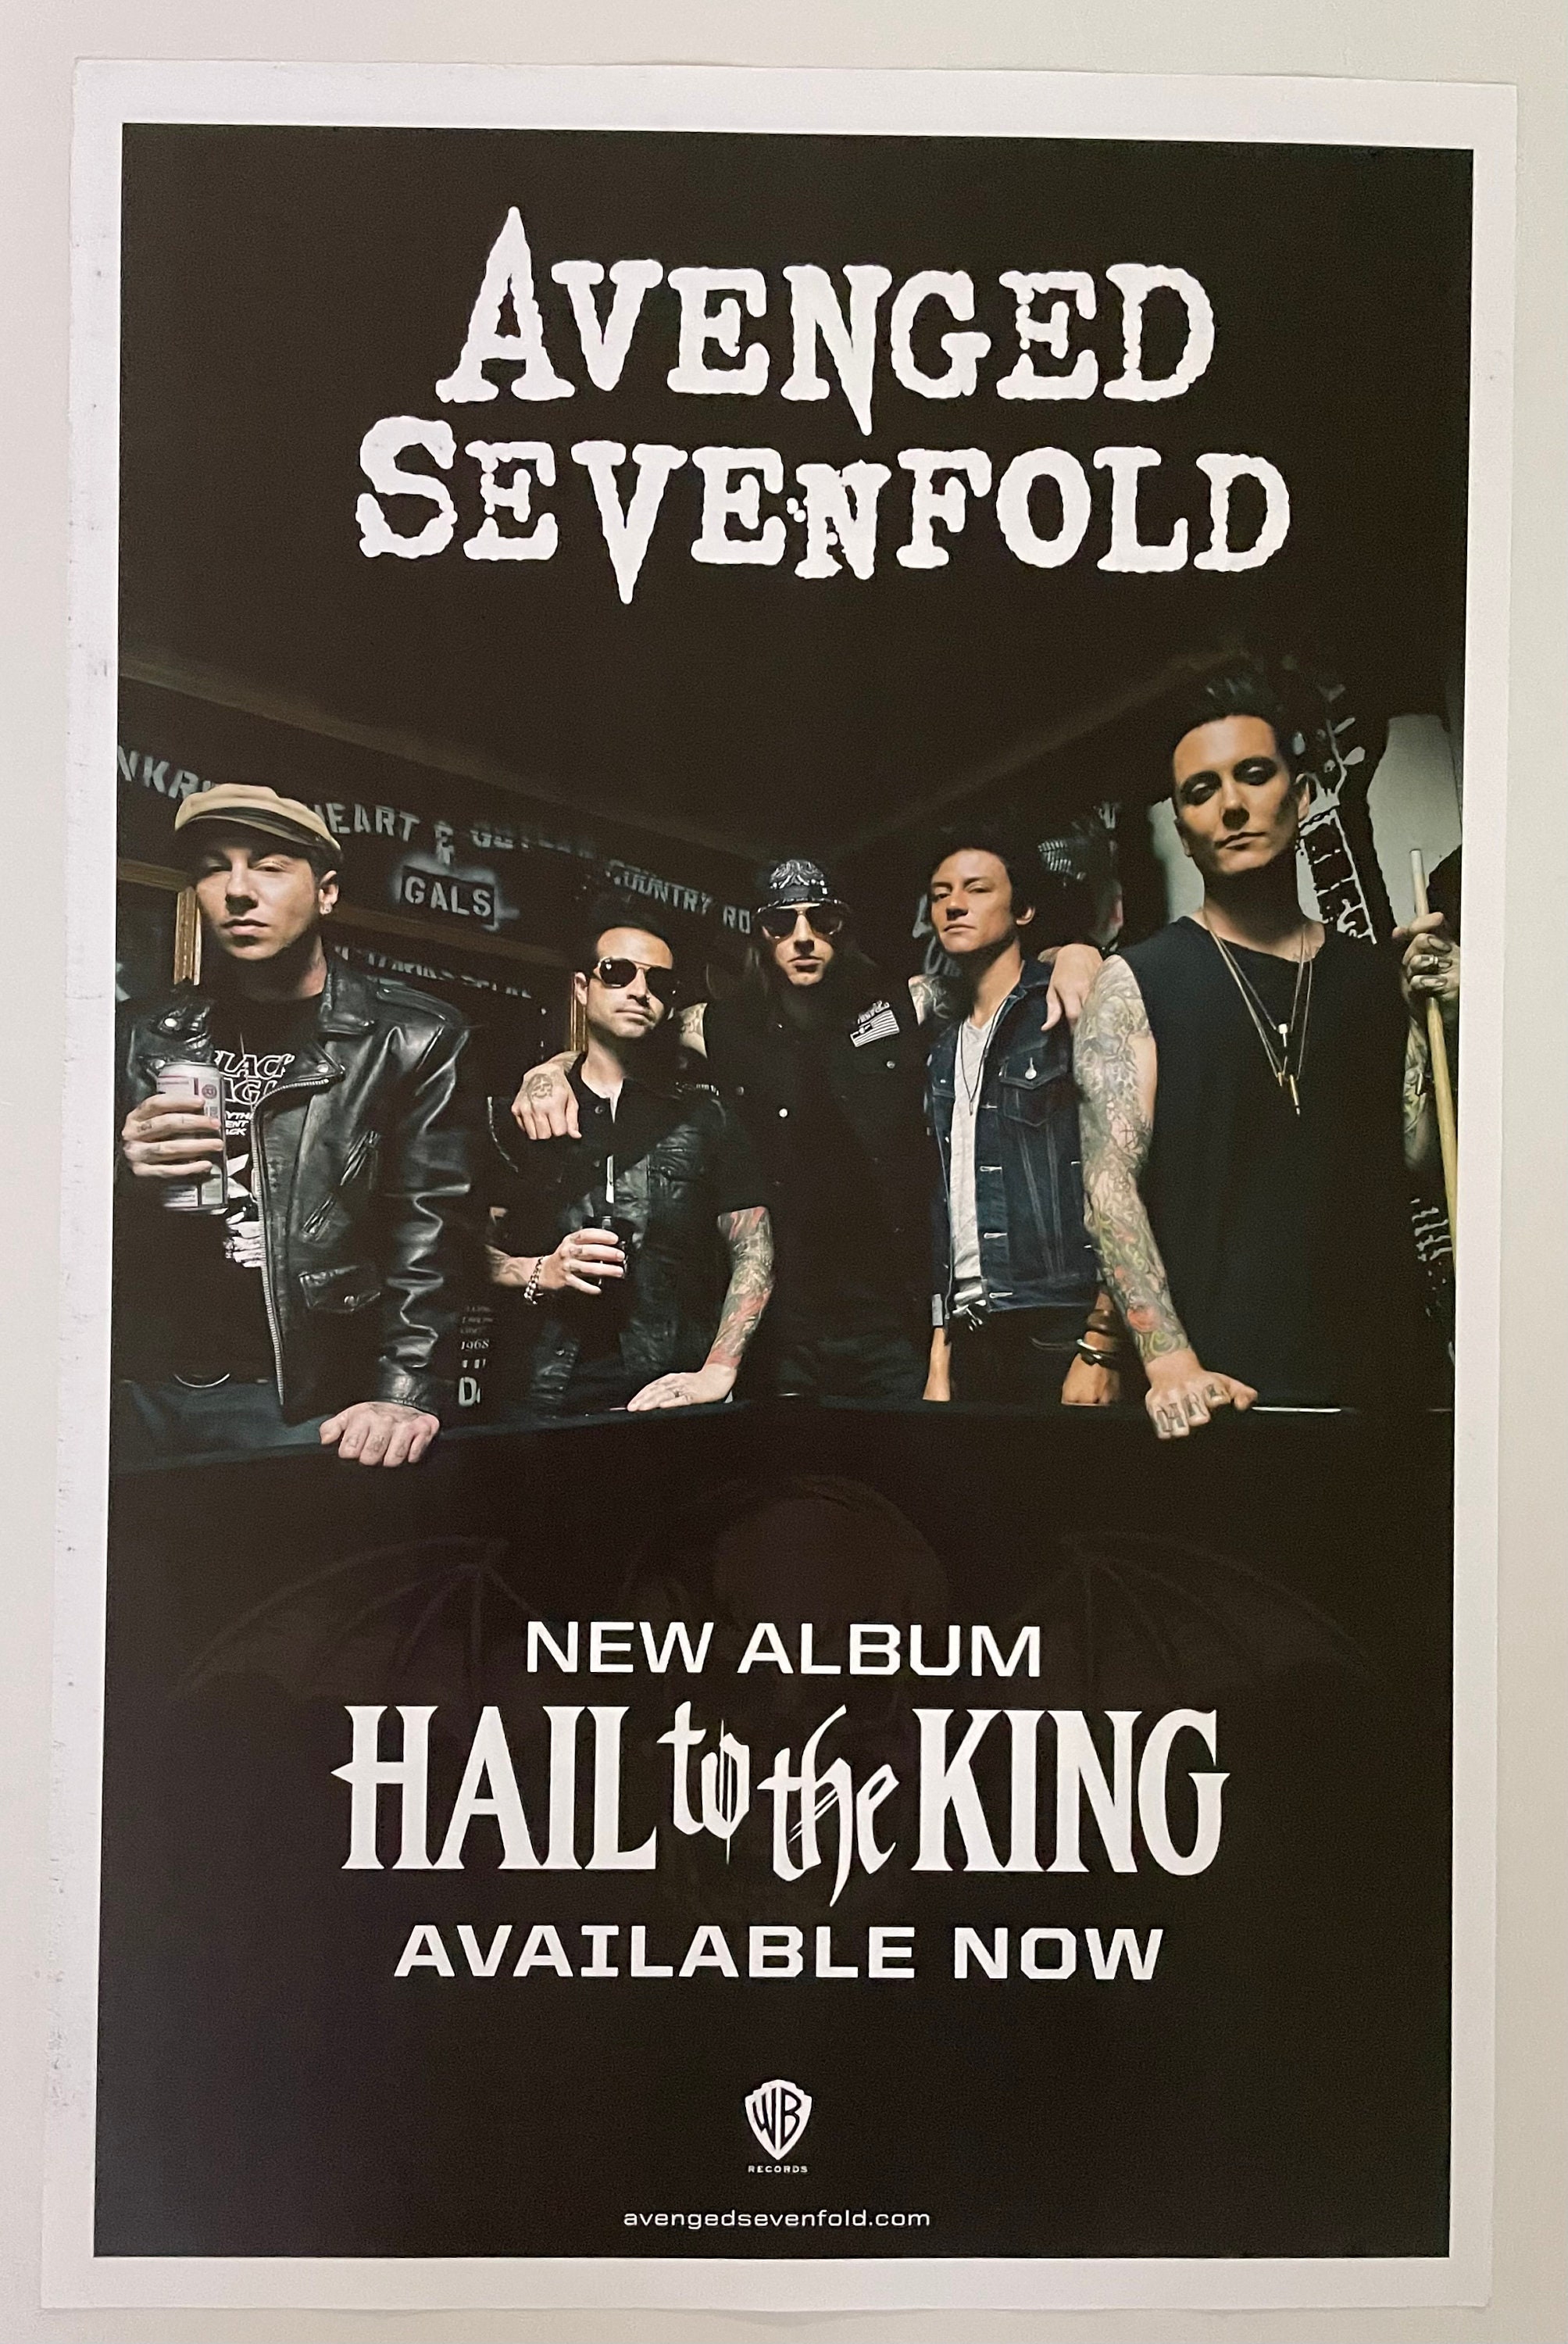 Avenged Sevenfold Announce Hail To The King Tour South America Dates.